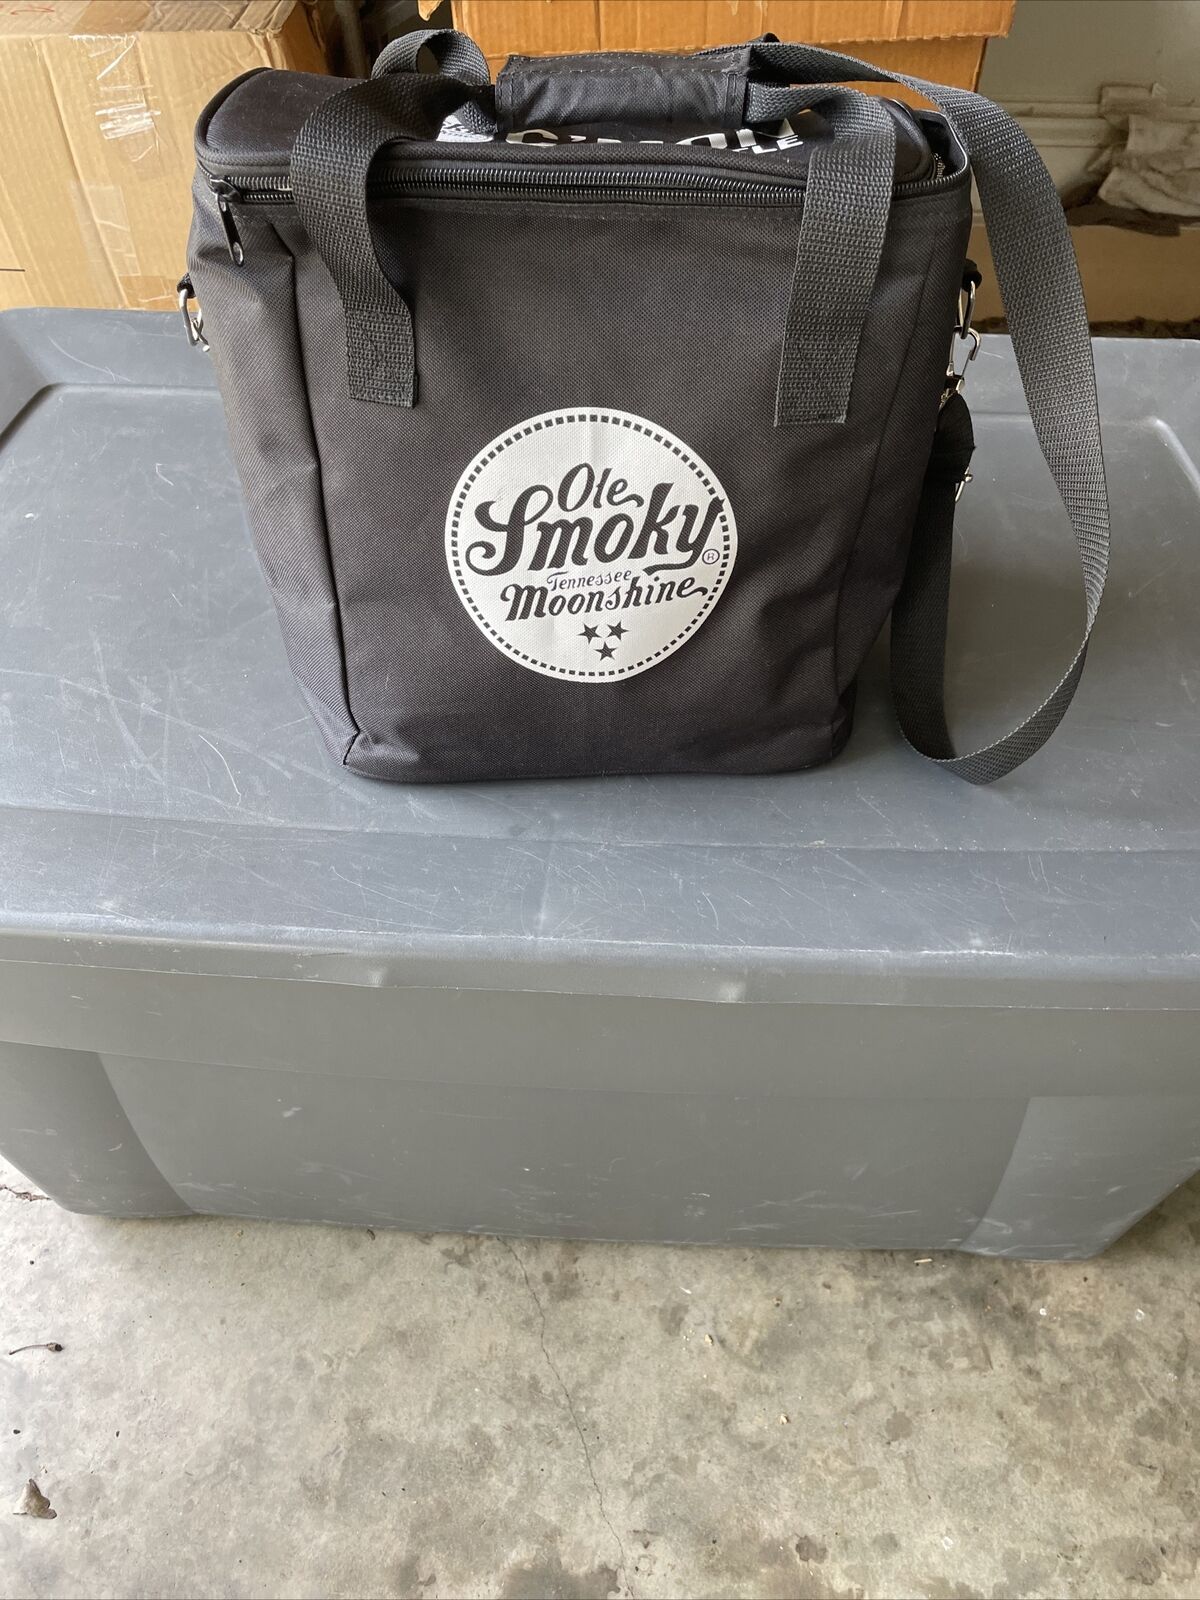 Ole Smoky Tennessee Moonshine Soft Cooler Insulated Bag C’MON LIVE A LITTLE